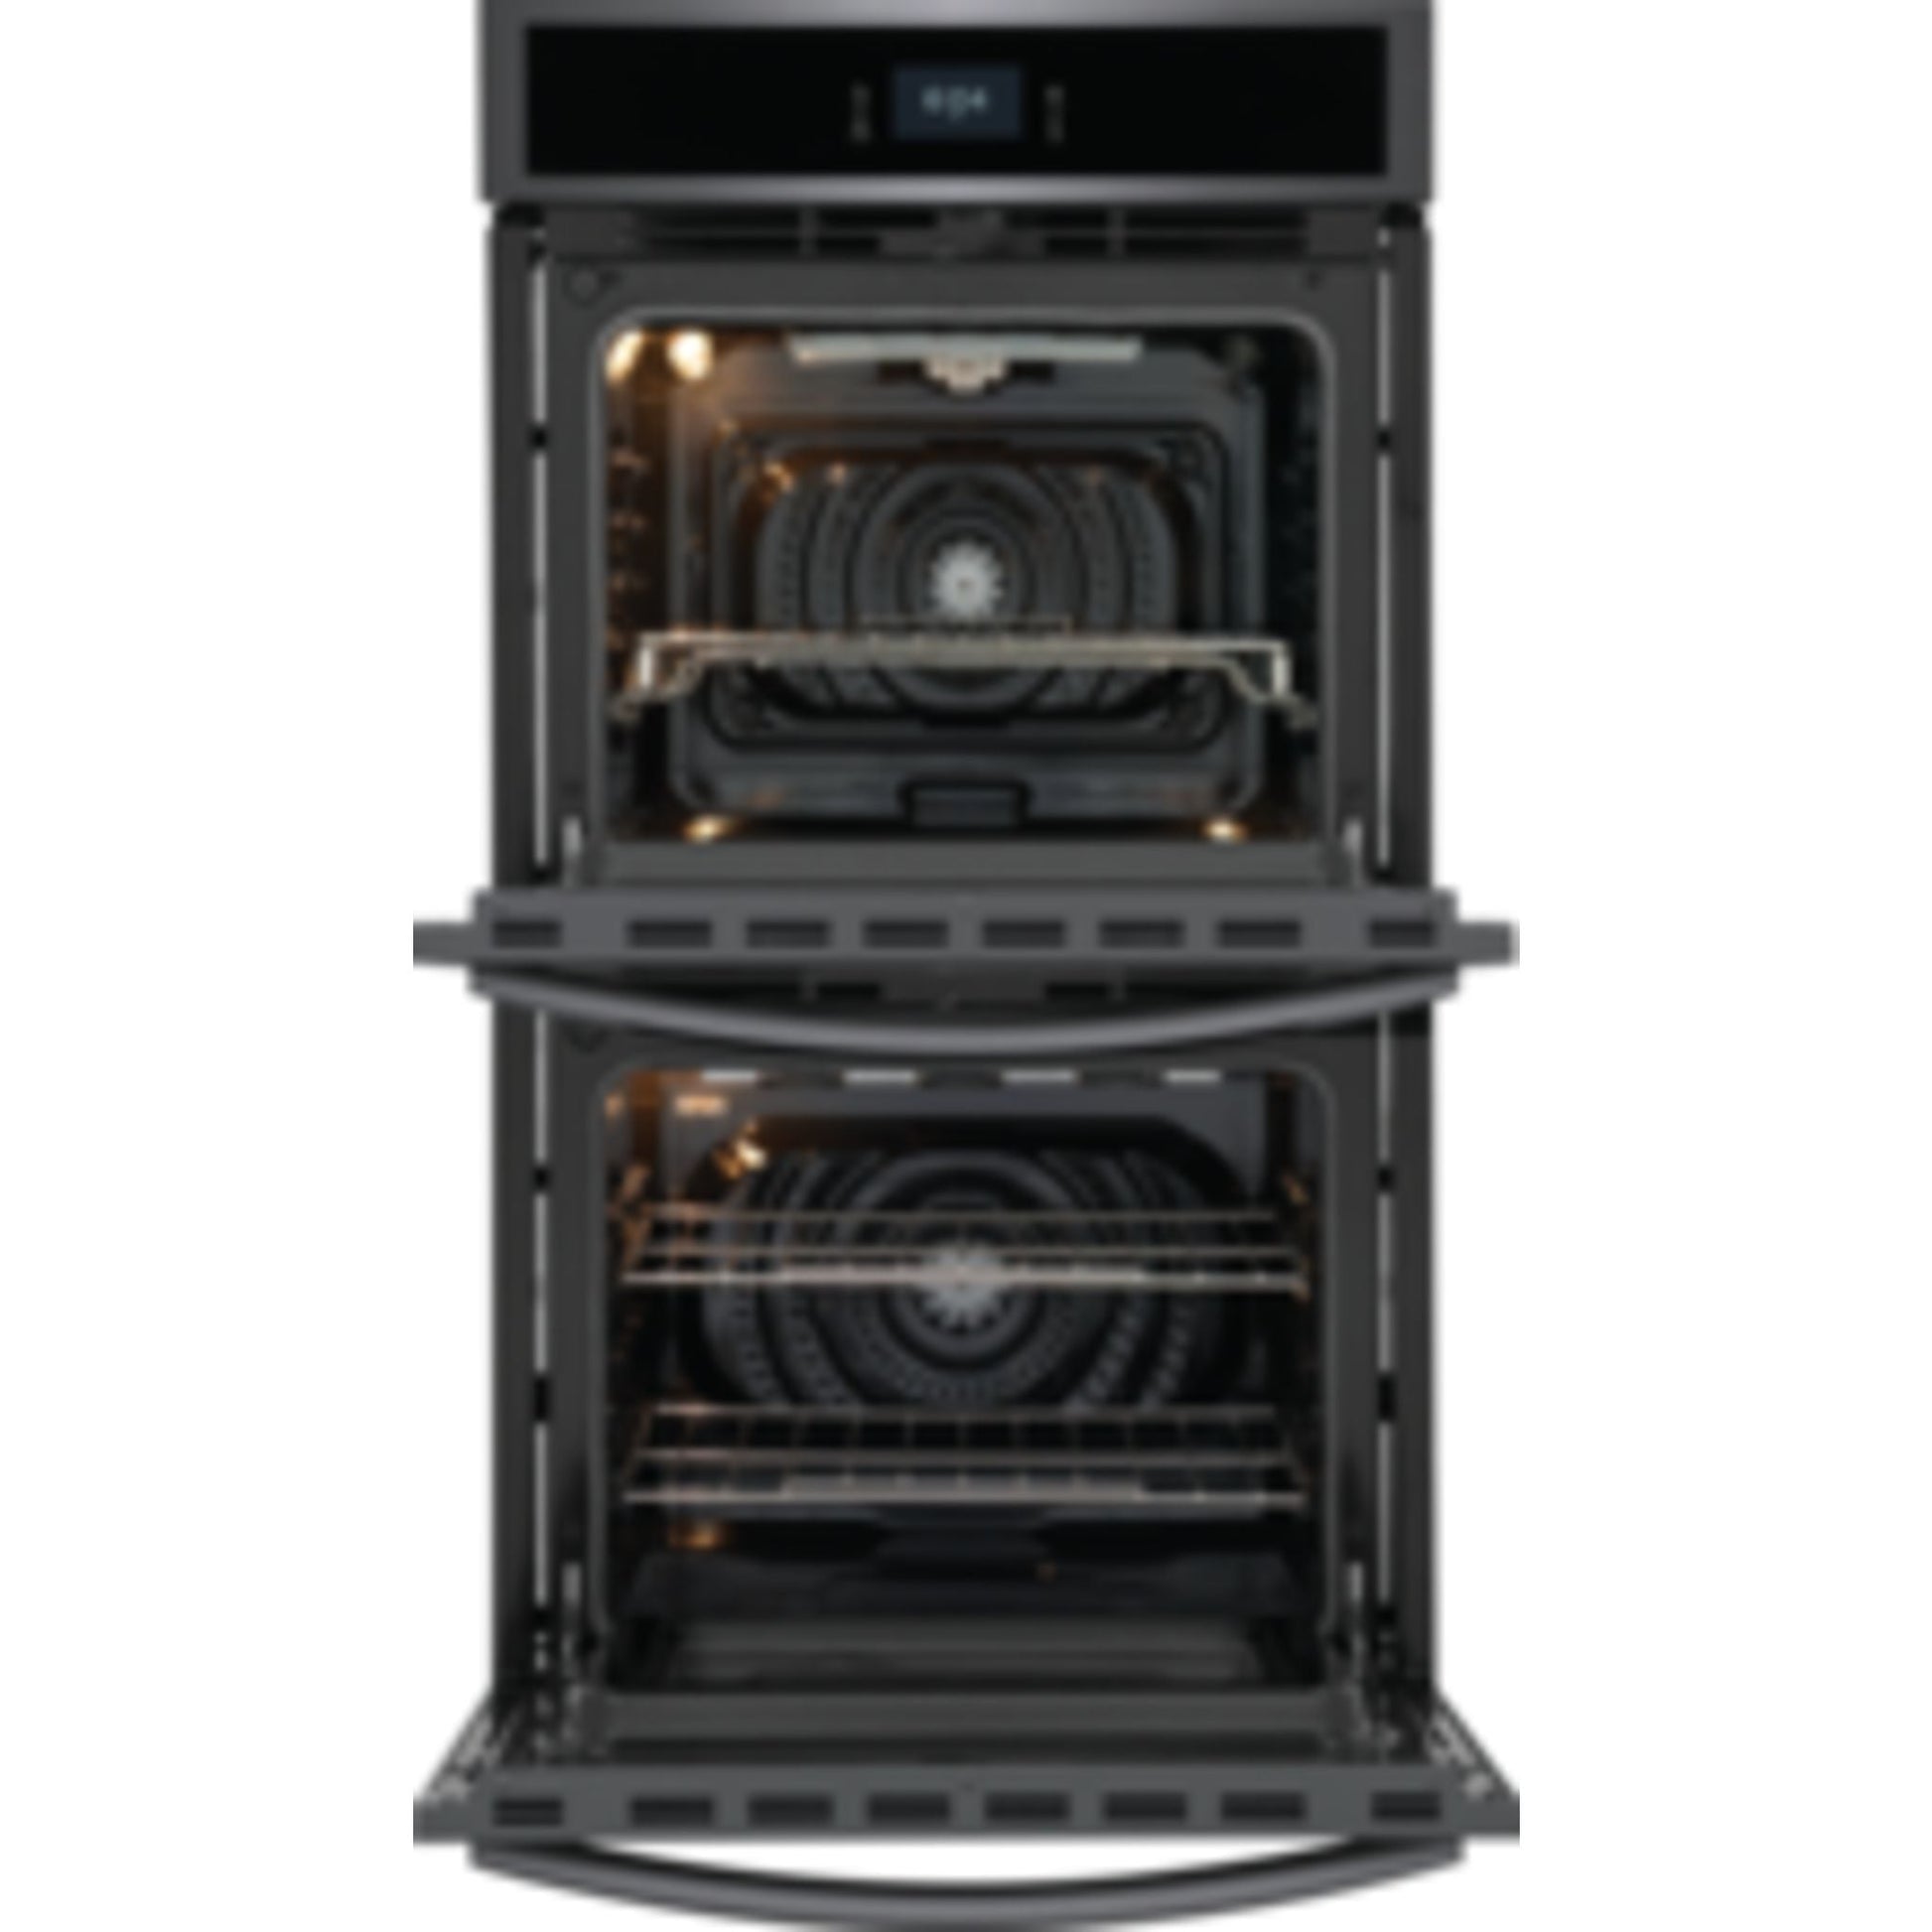 Frigidaire Gallery 27” Double Wall Oven (GCWD2767AD) - Black Stainless, SmudgeProof